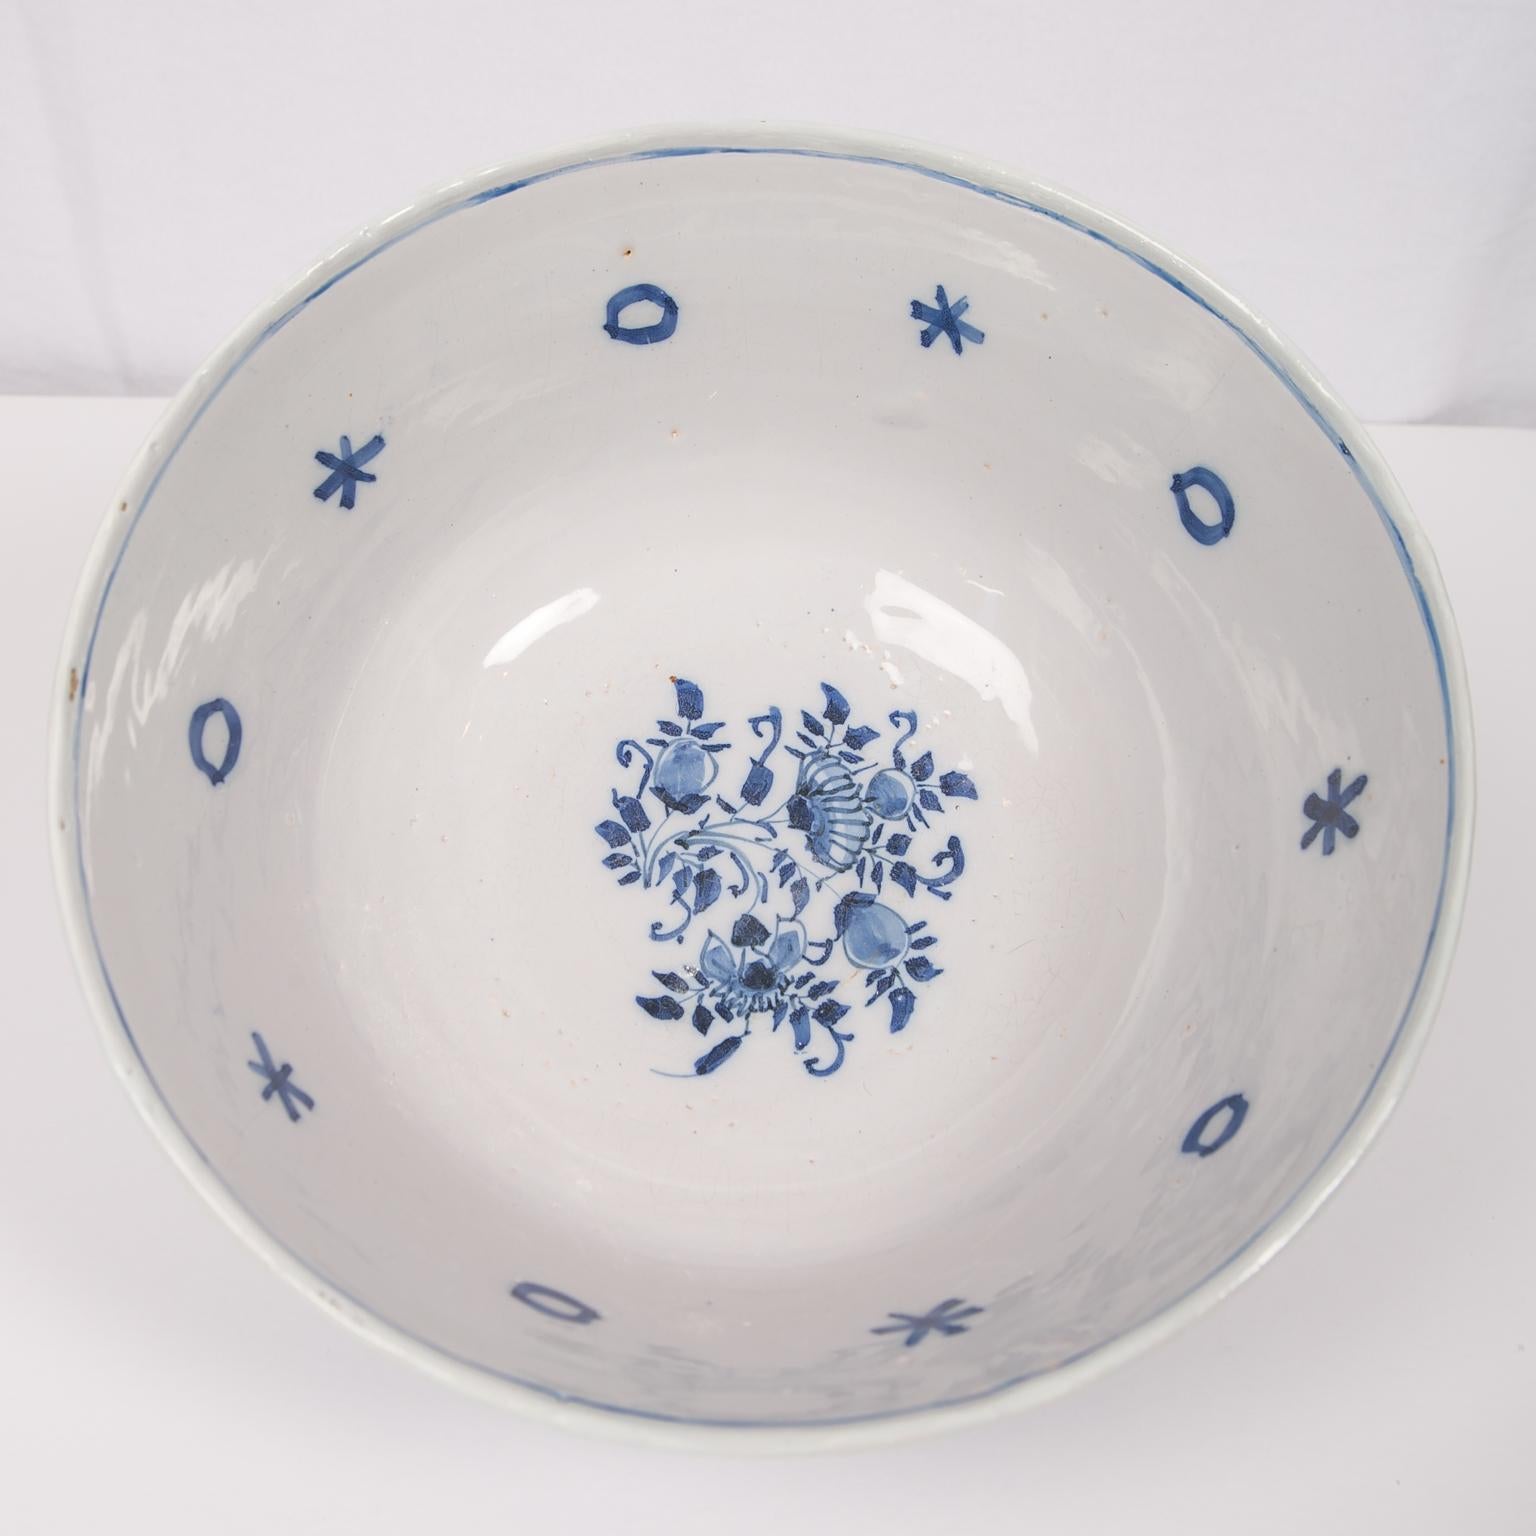 A large antique Blue and White Dutch Delft punch bowl made in the 18th century, circa 1780. This charming bowl is painted in a soft cobalt blue, decorated on the outside with a wide band of delicate flowers and vines. Along the top and near the